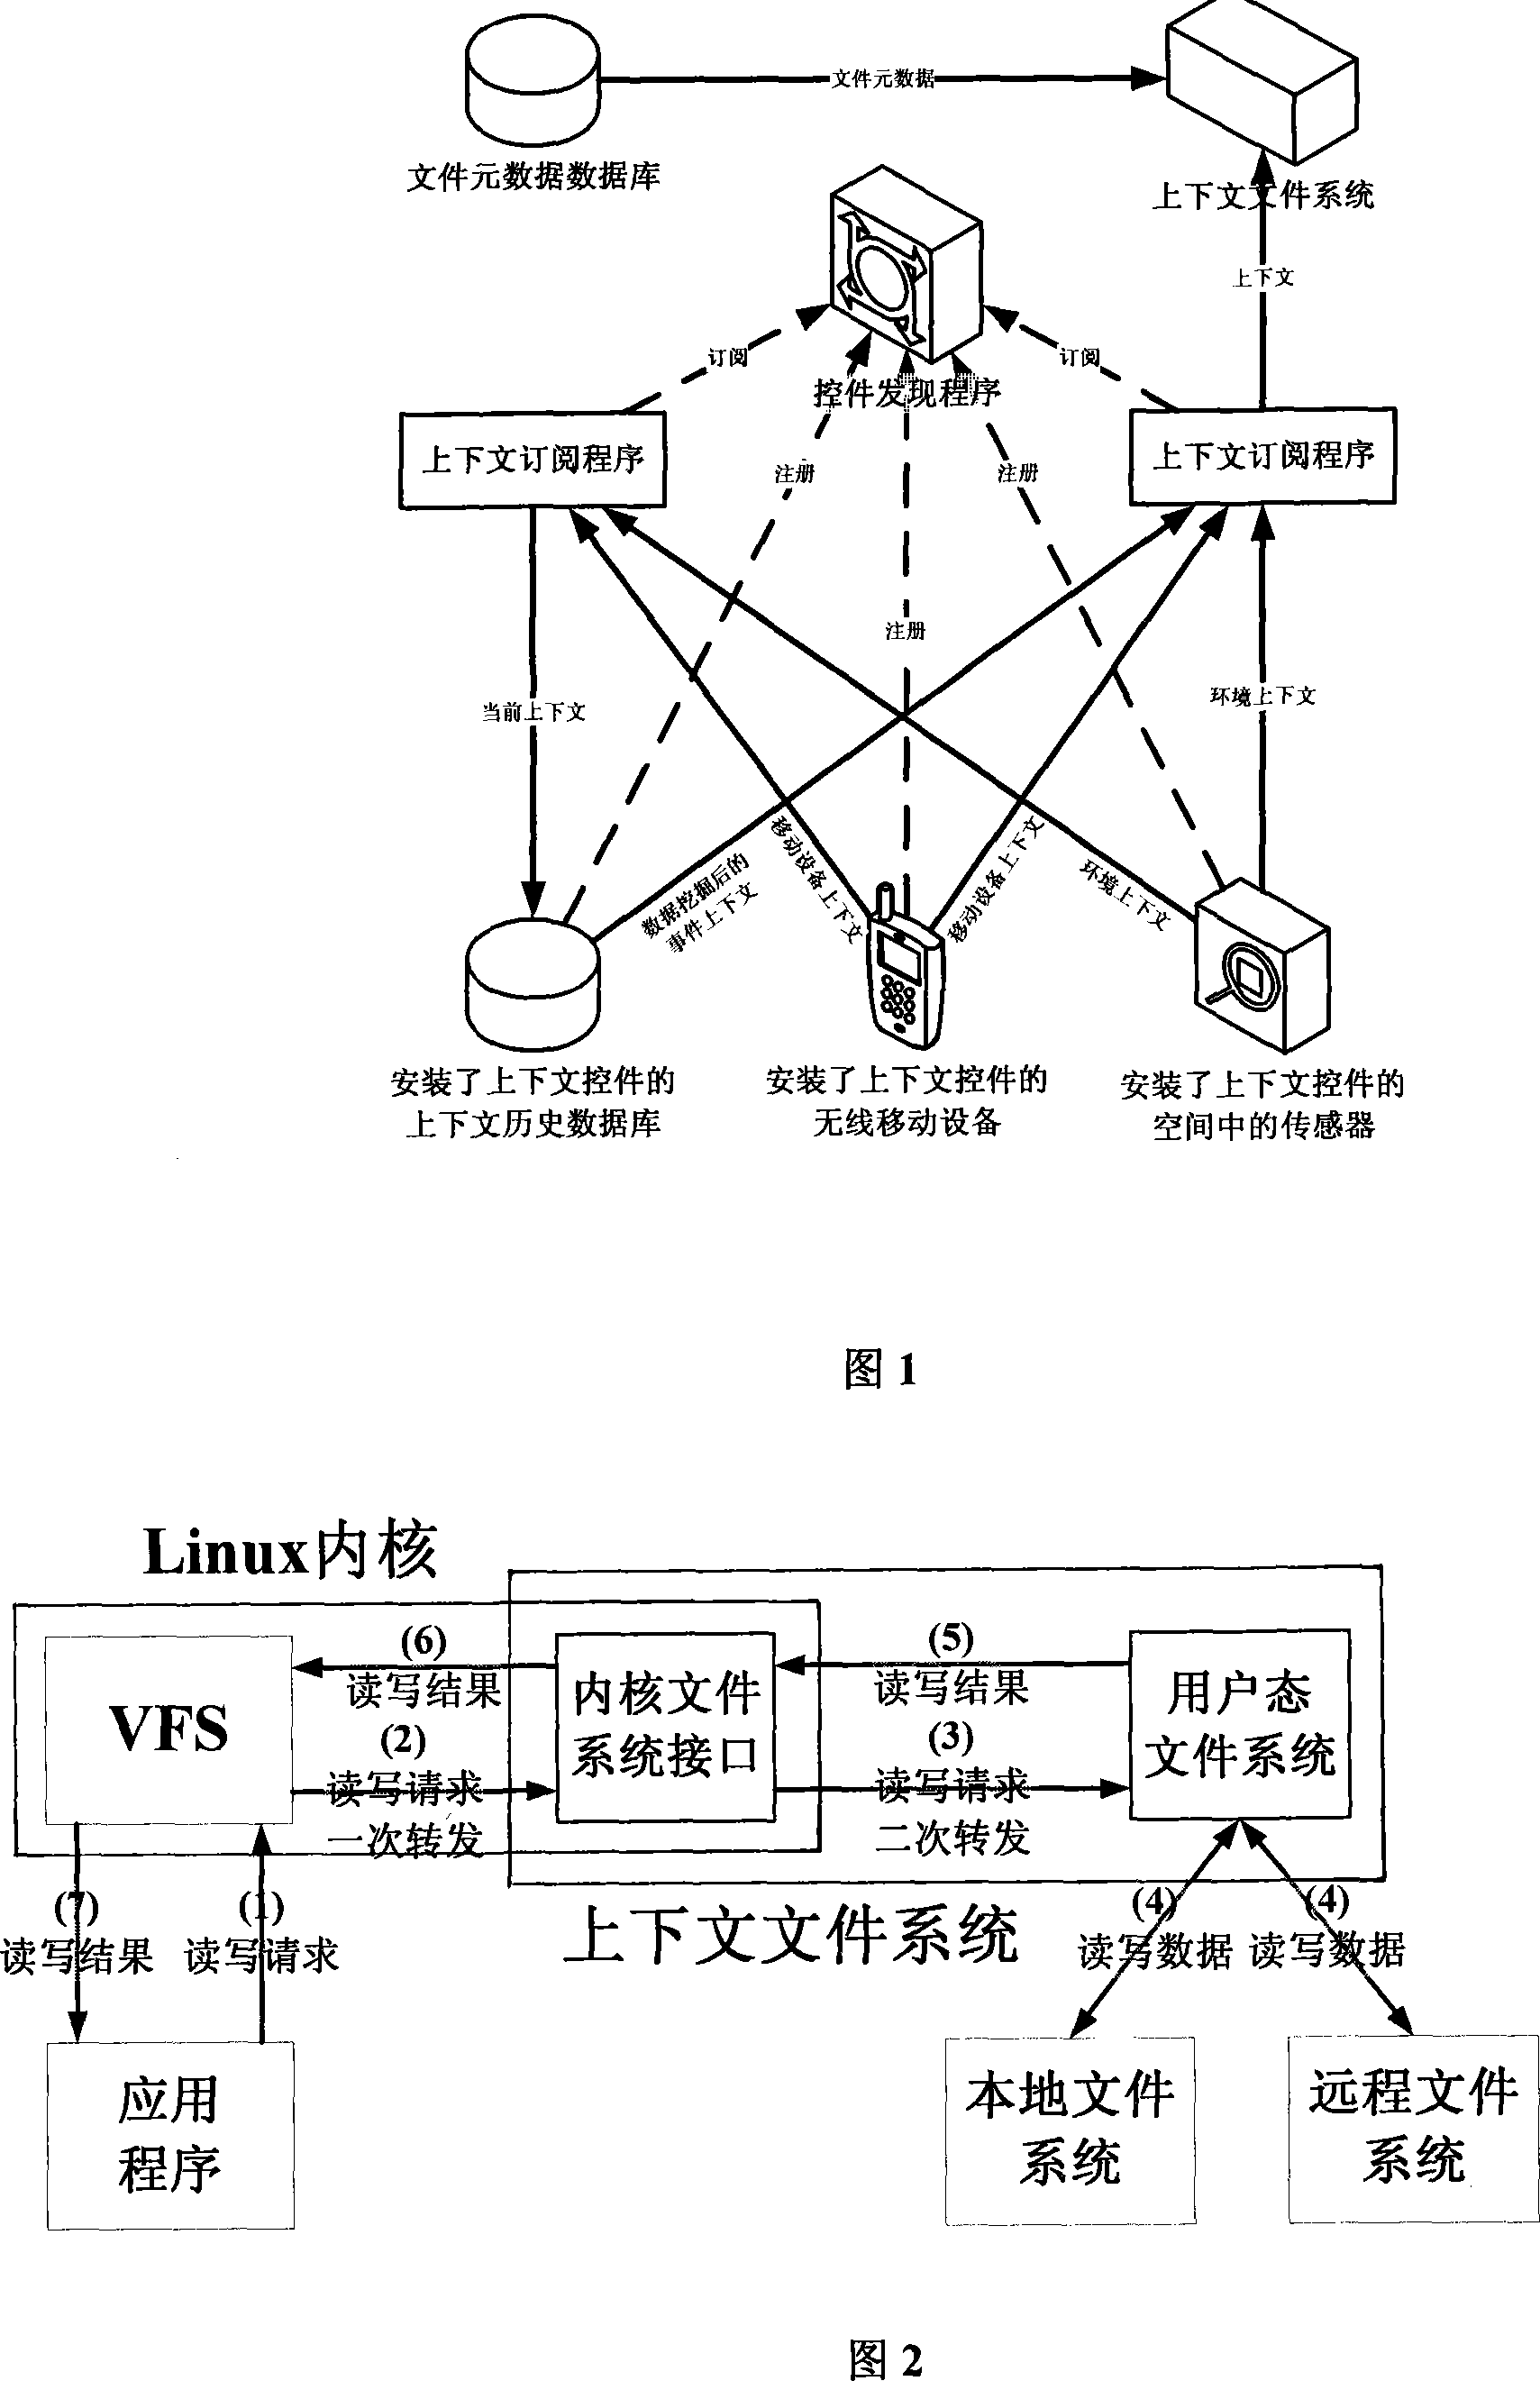 File services method based on ContextFS context file systems